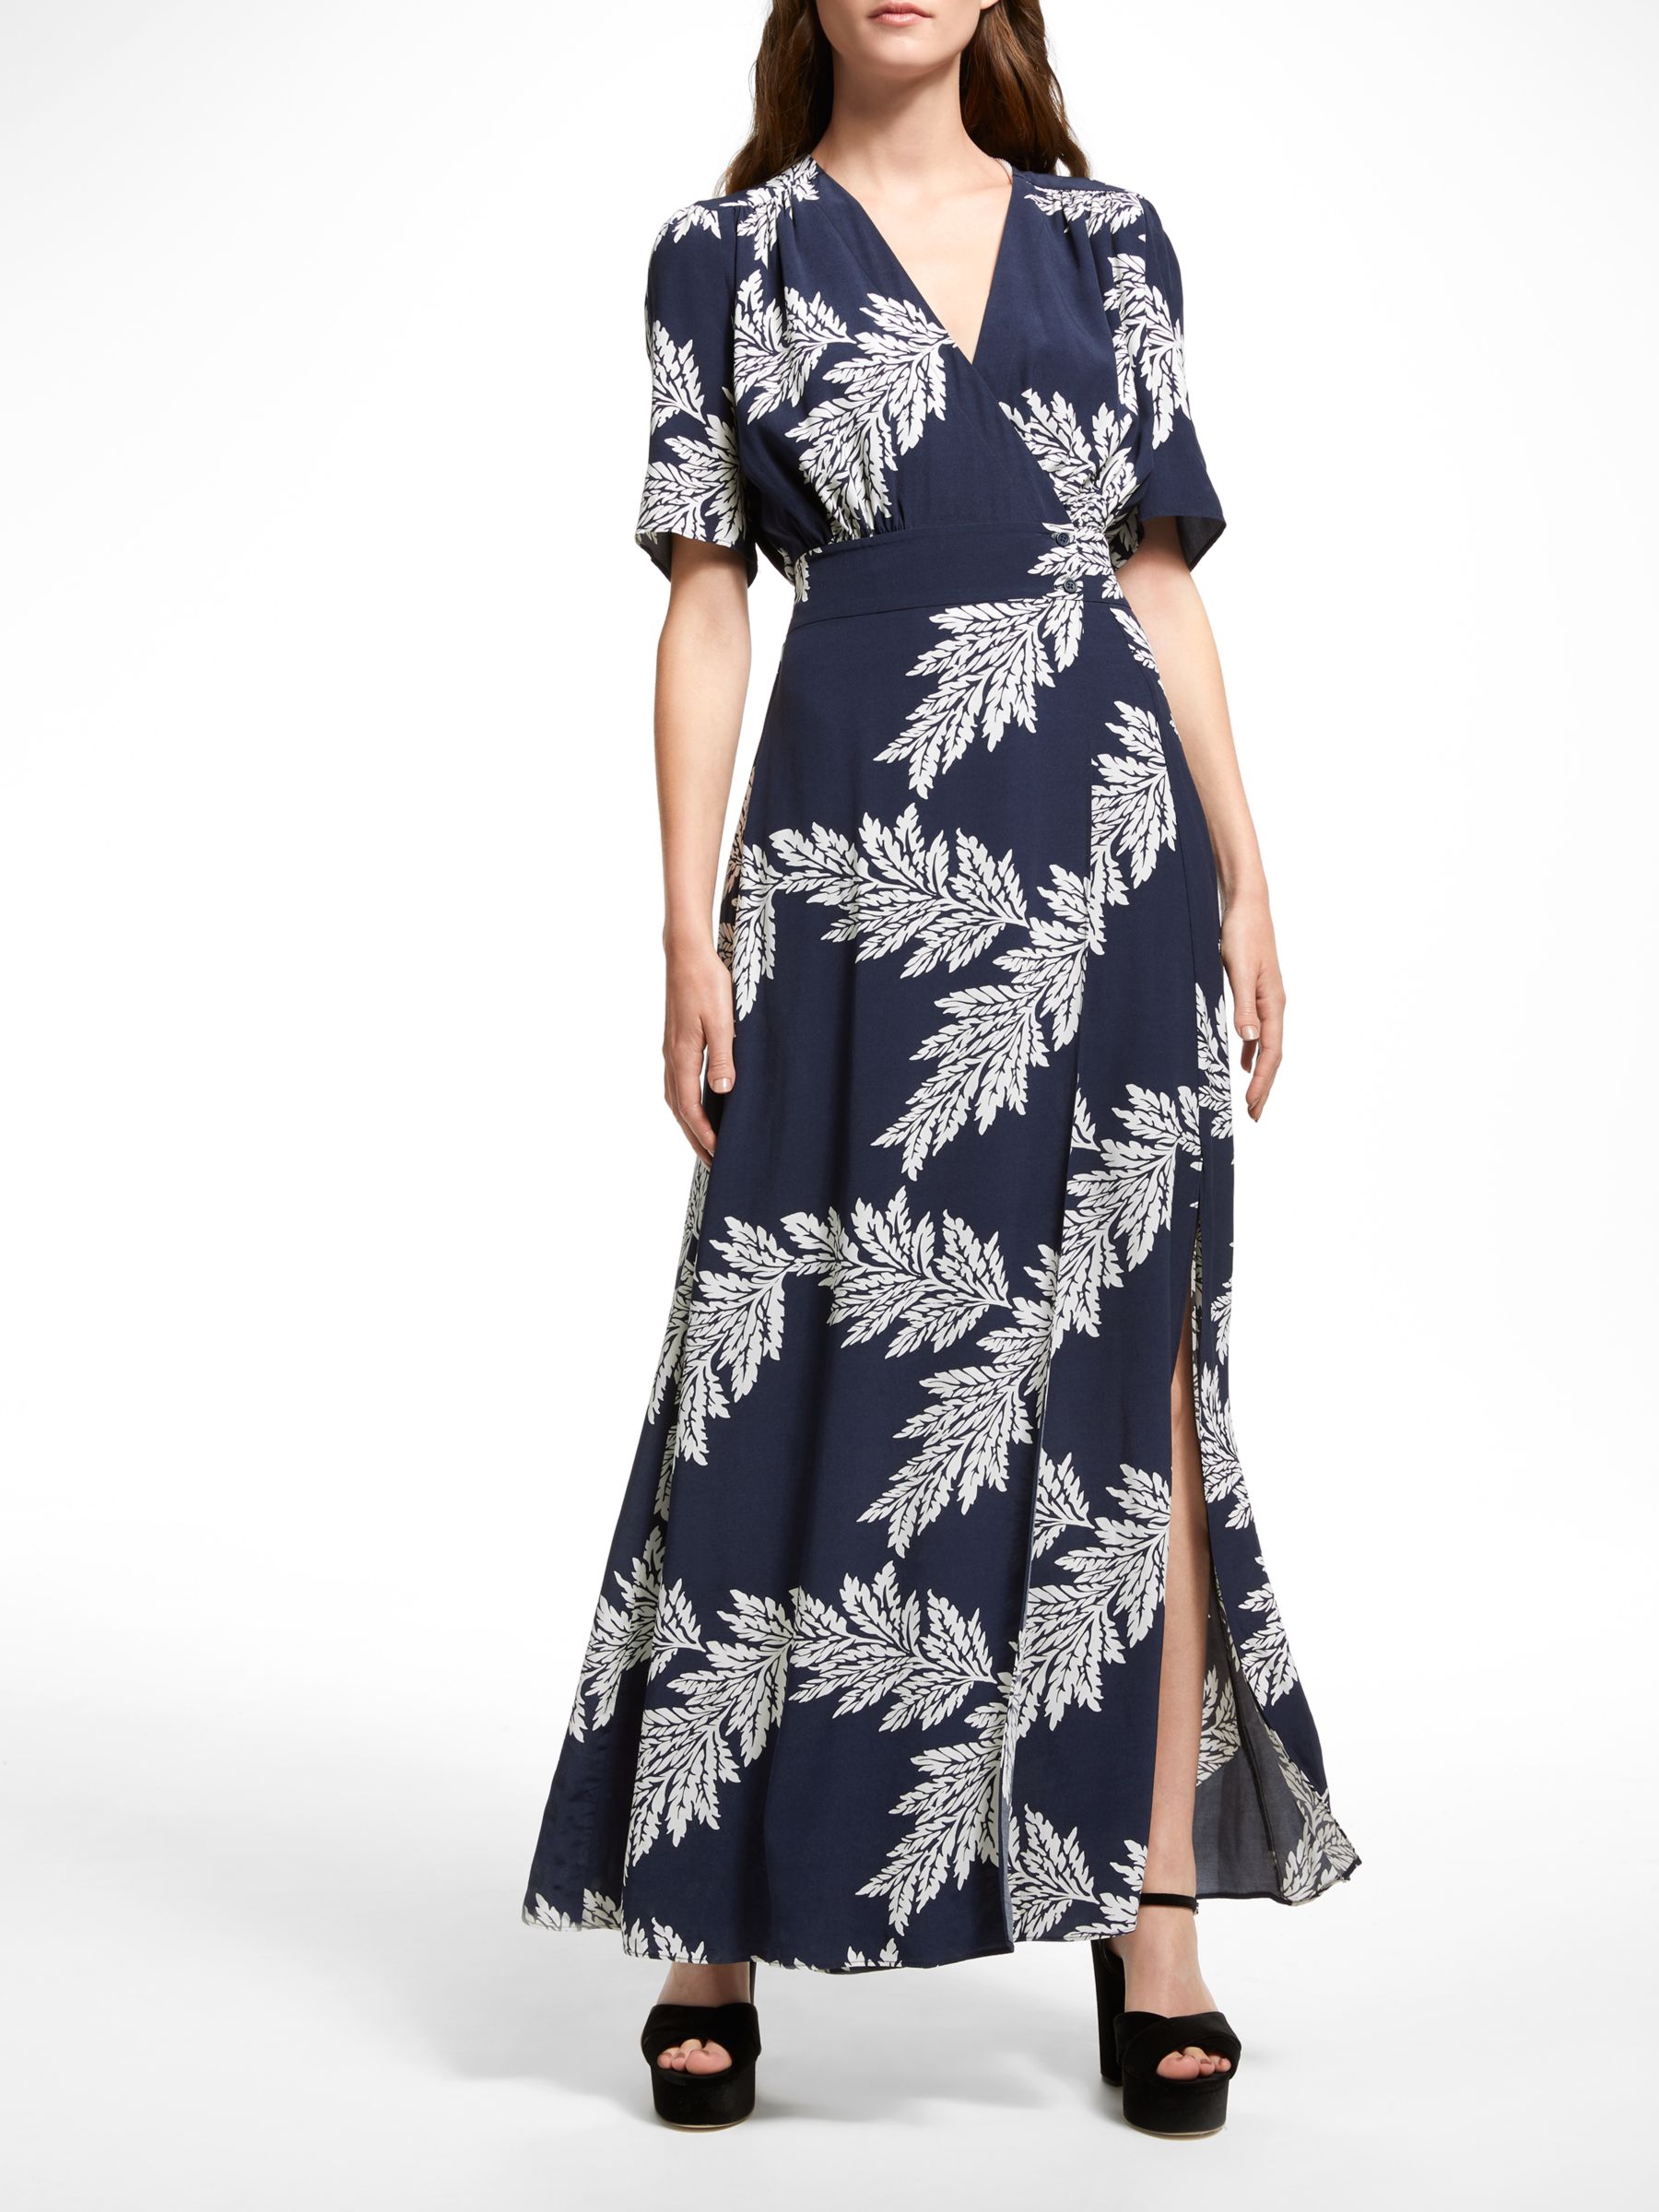 Somerset by Alice Temperley Palm Print Maxi Dress, Navy